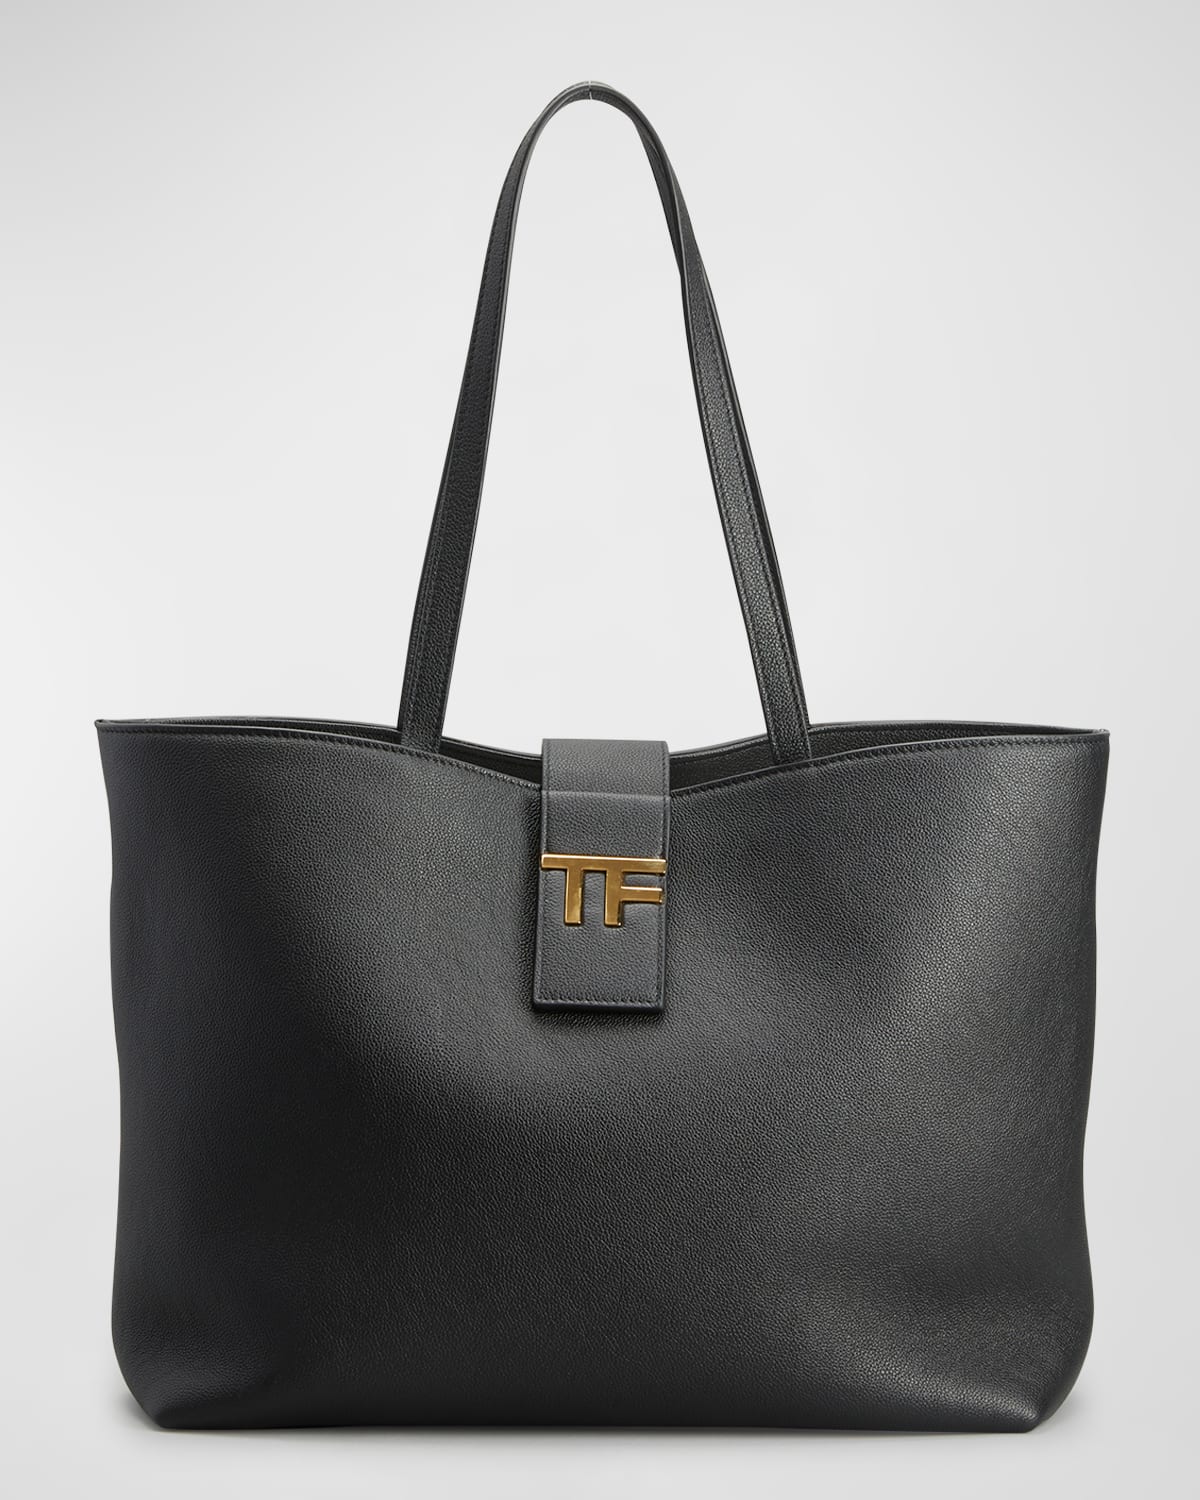 TOM FORD TF SMALL E/W TOTE IN GRAINED LEATHER